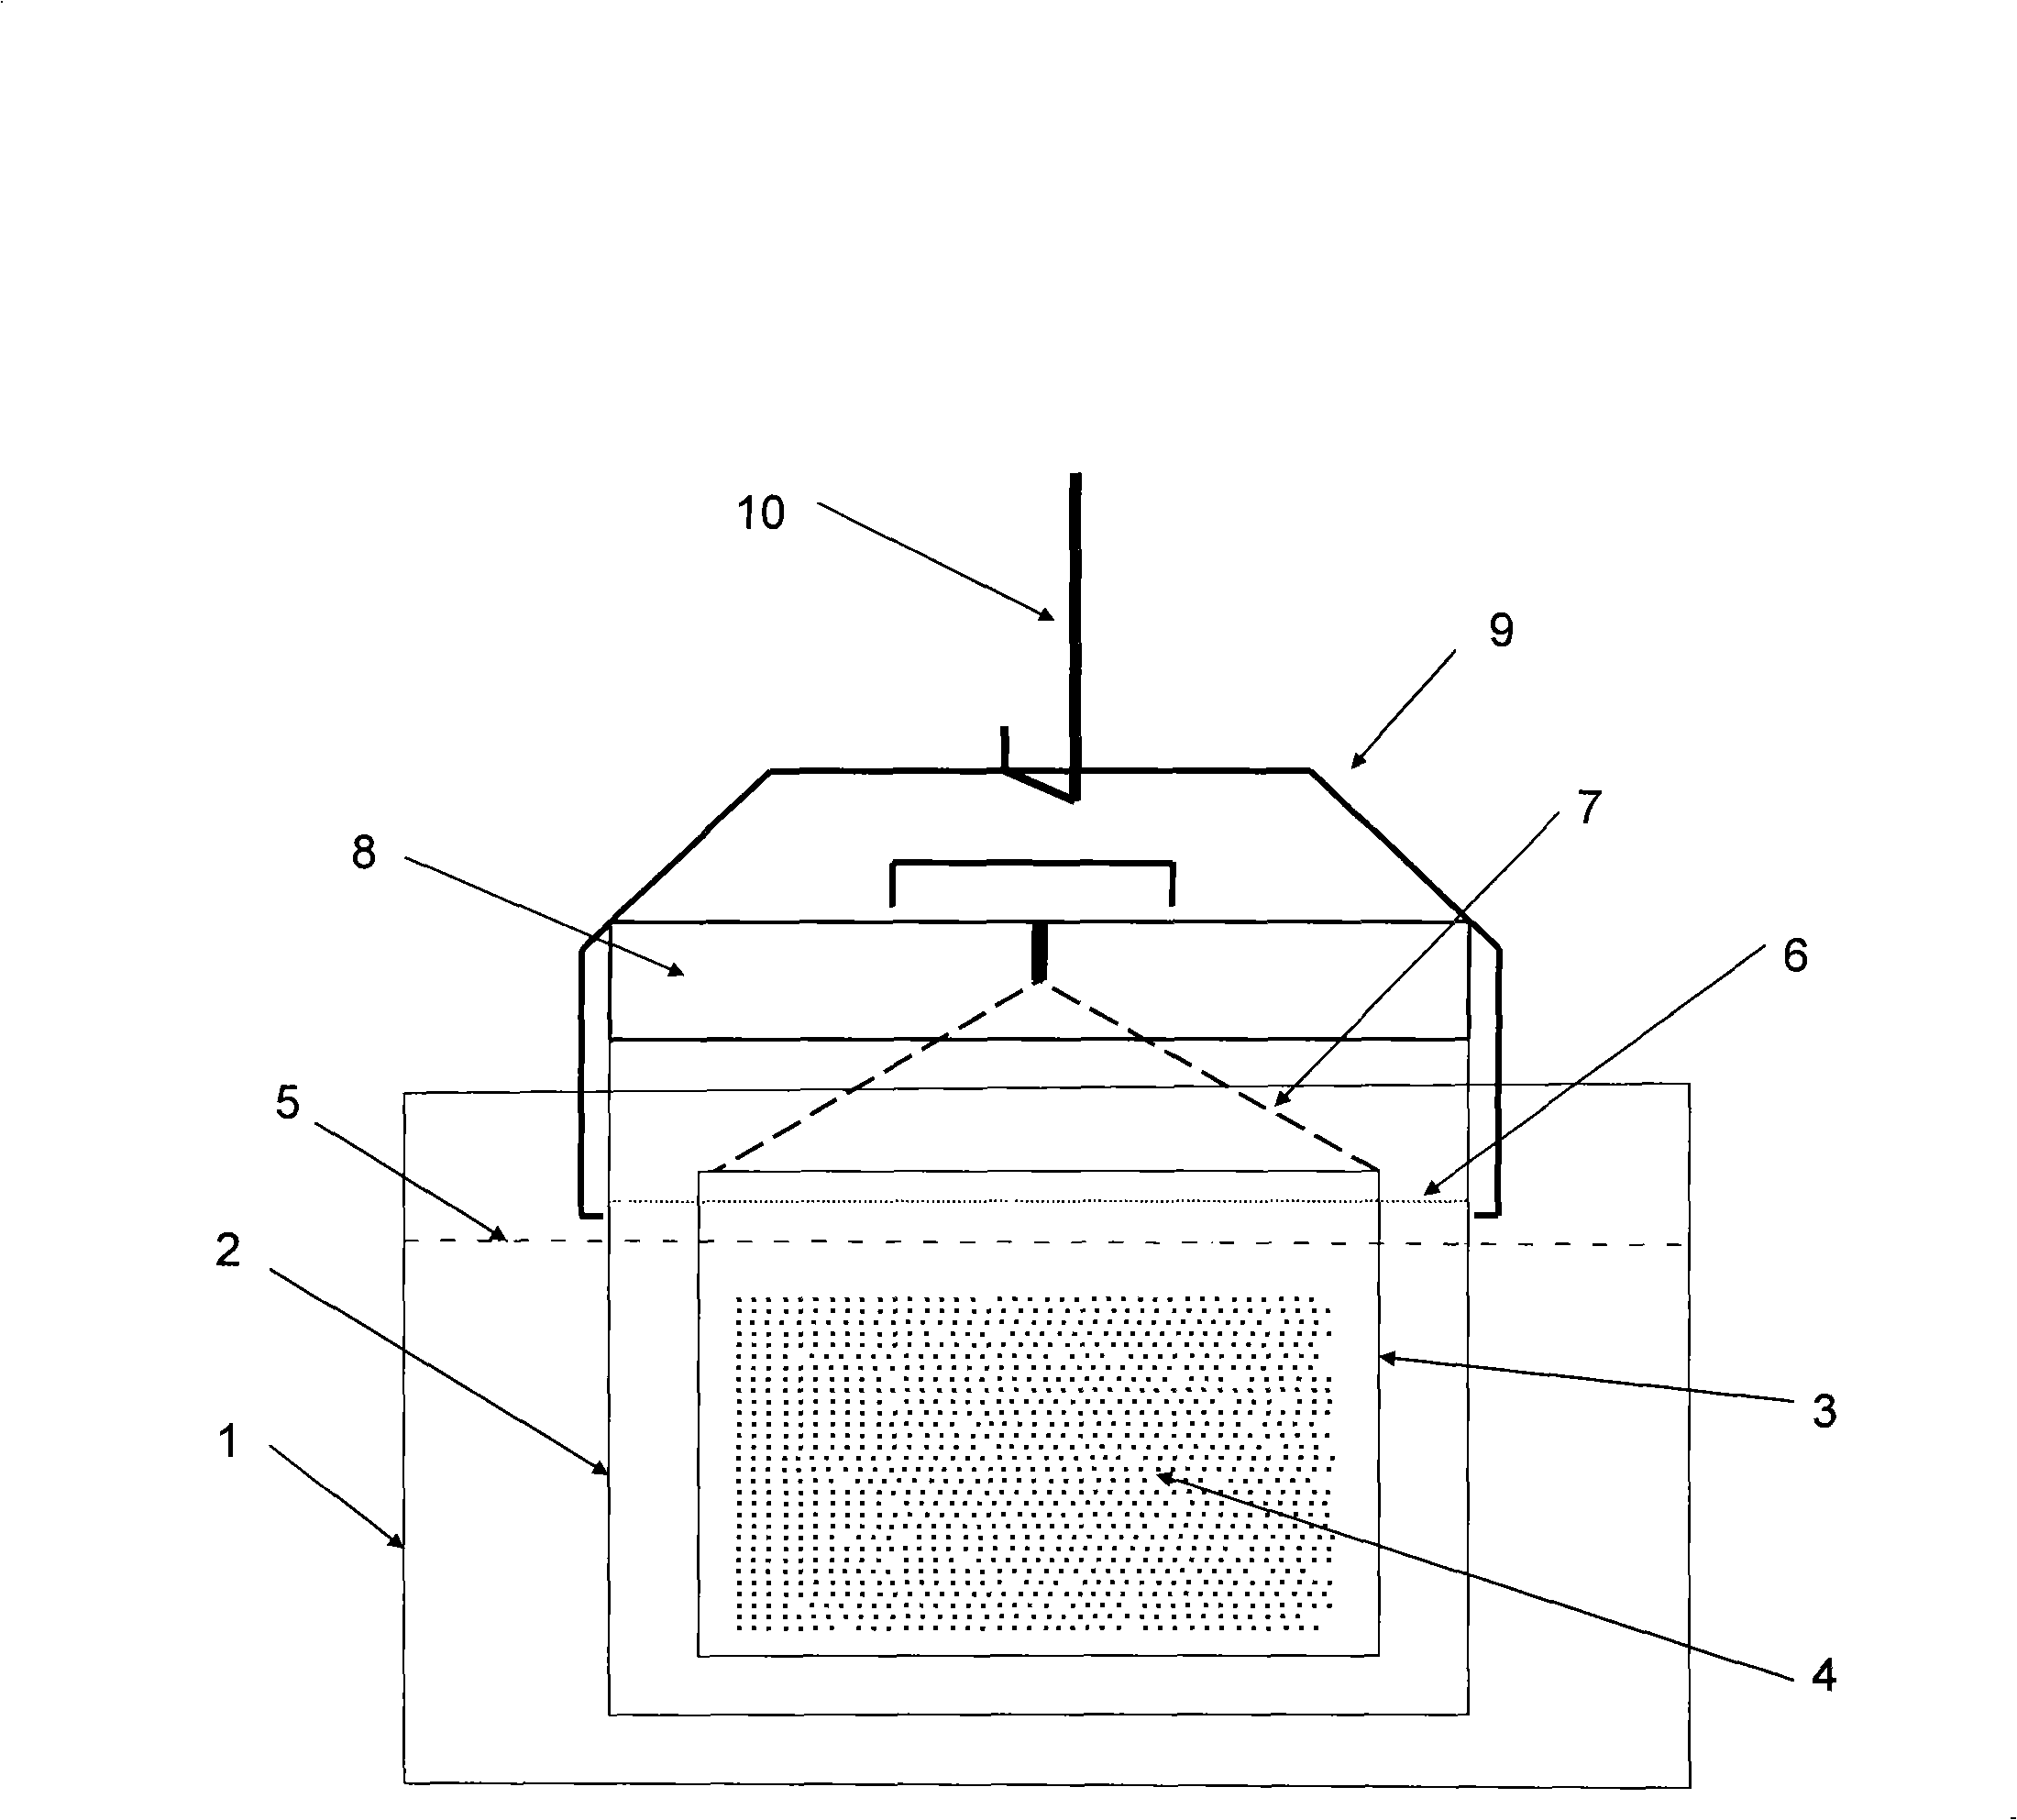 Method for preparing and abstracting lycopene